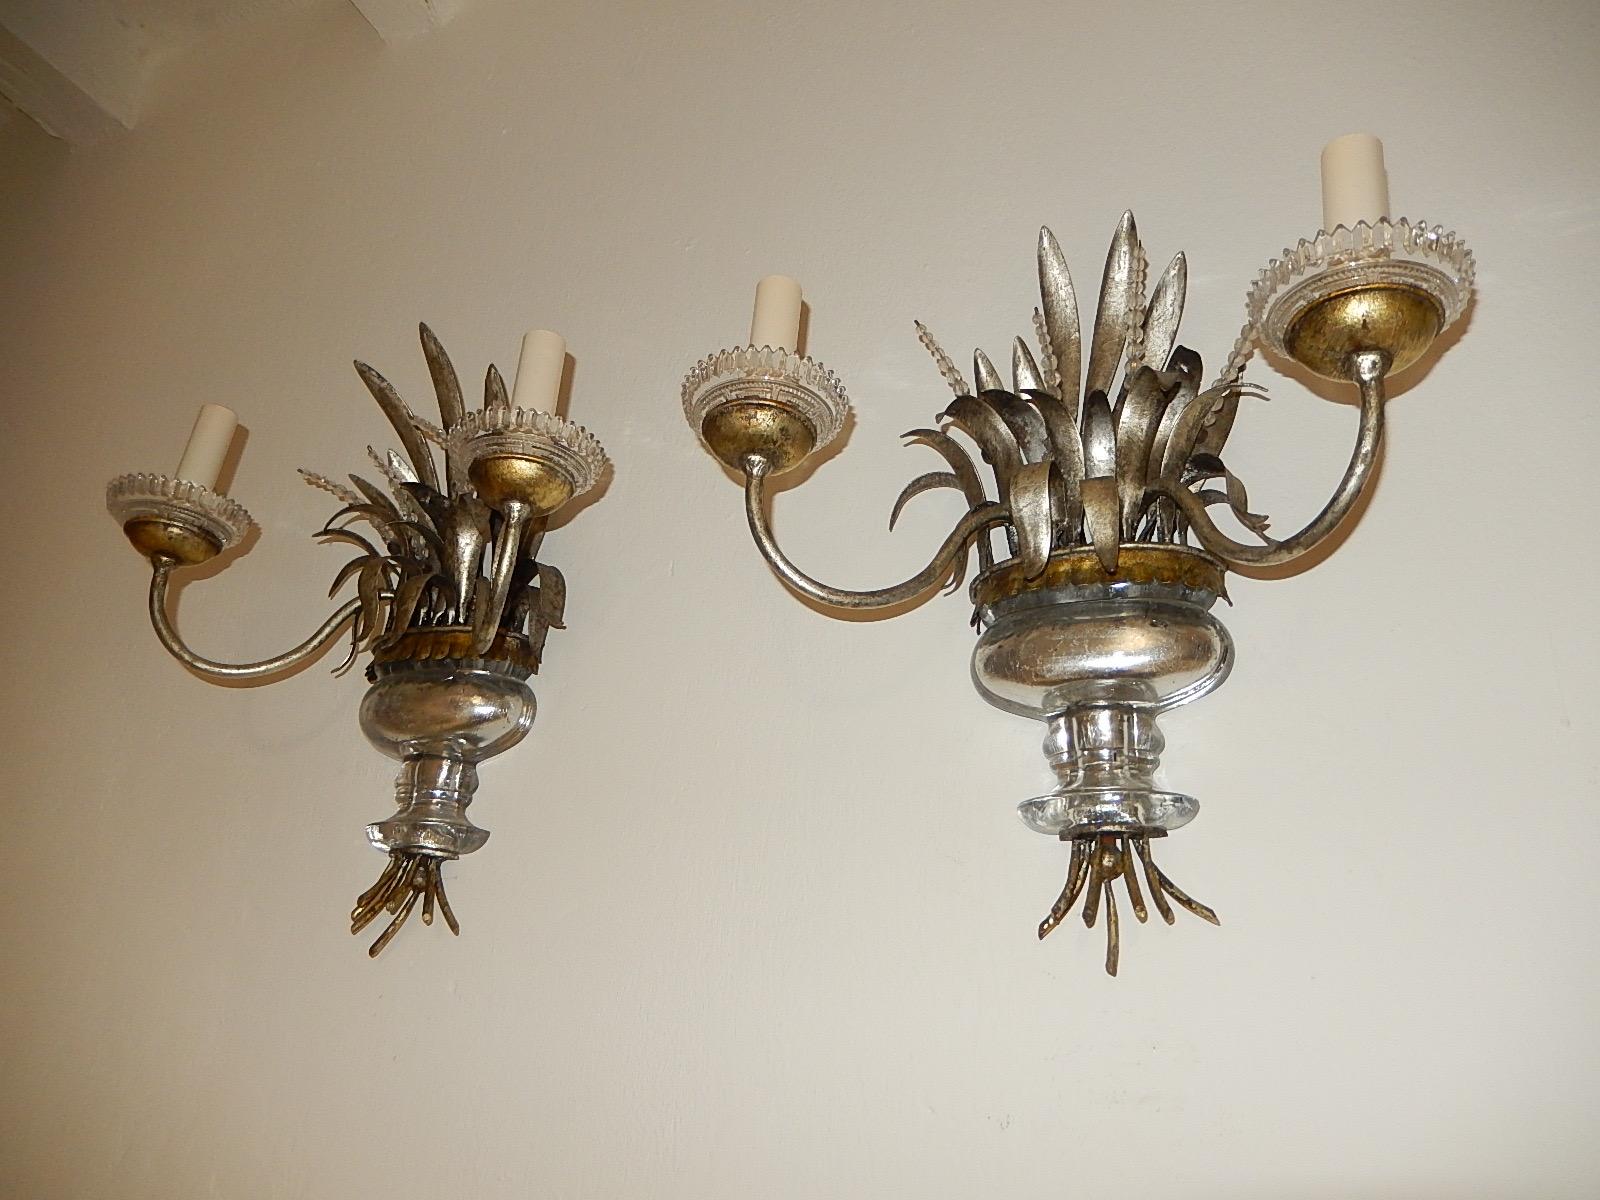 Housing 2-light each. Gilt metal, silver leaf under crystal. Beaded springs. Gold detailing. Crystal bobeches. Will be-wired with appropriate sockets to country and ready to hang. Free priority UPS shipping from Italy, no custom fees.